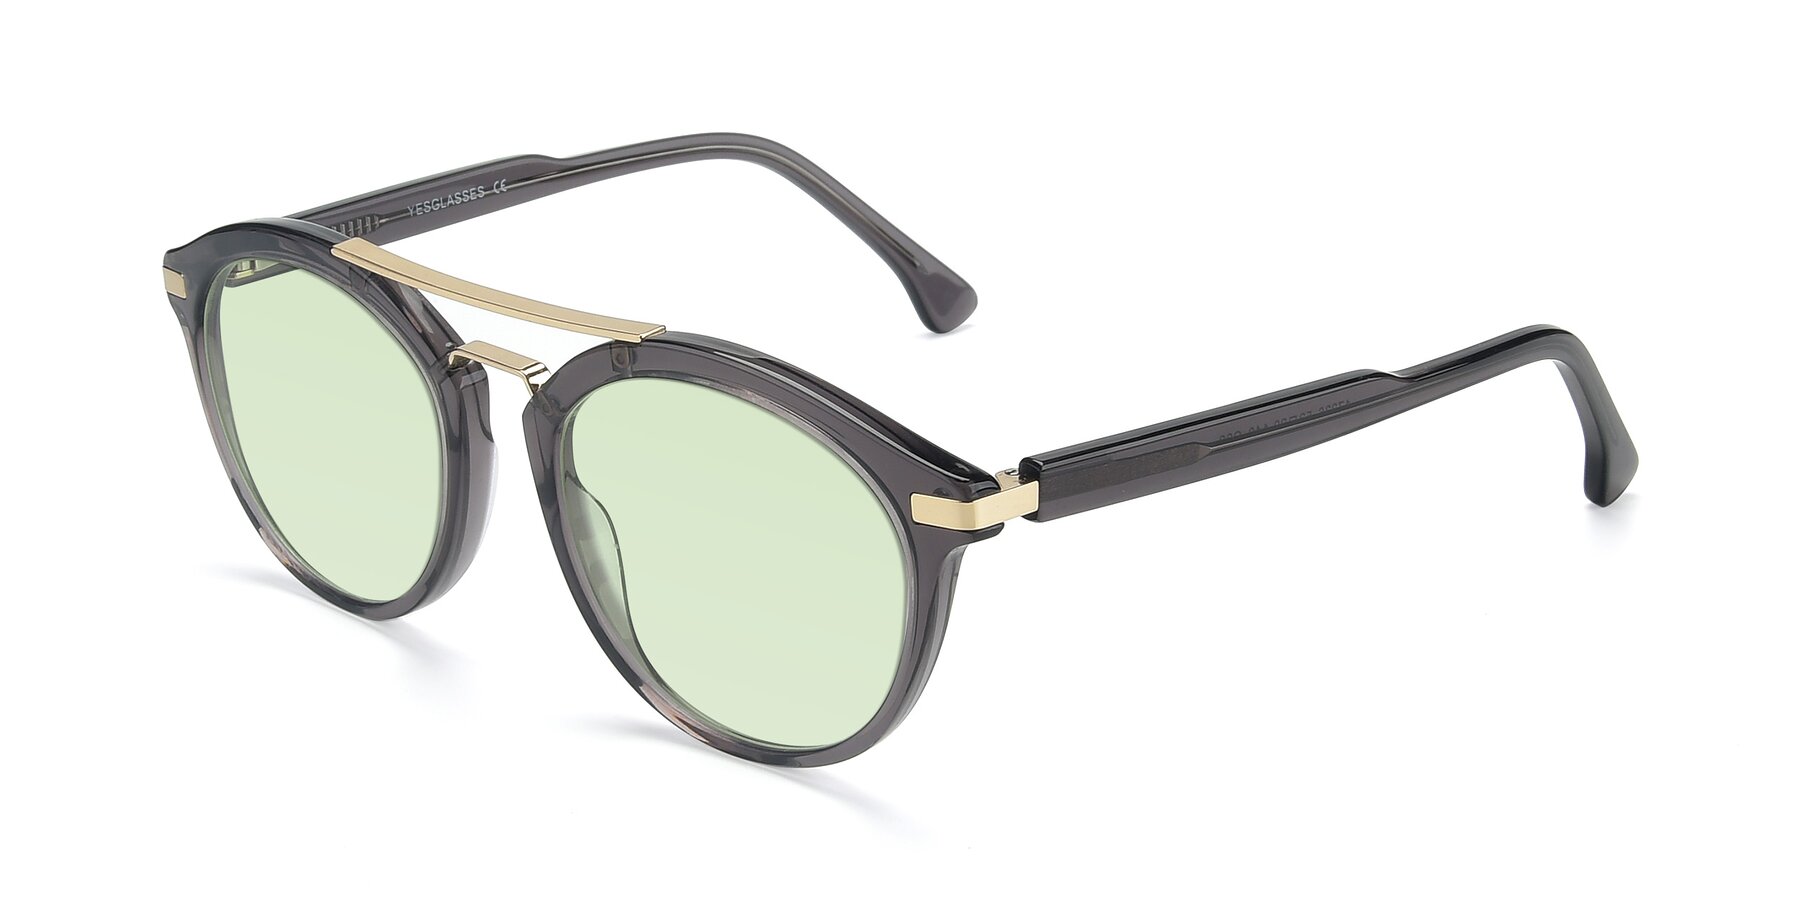 Angle of 17236 in Gray-Gold with Light Green Tinted Lenses